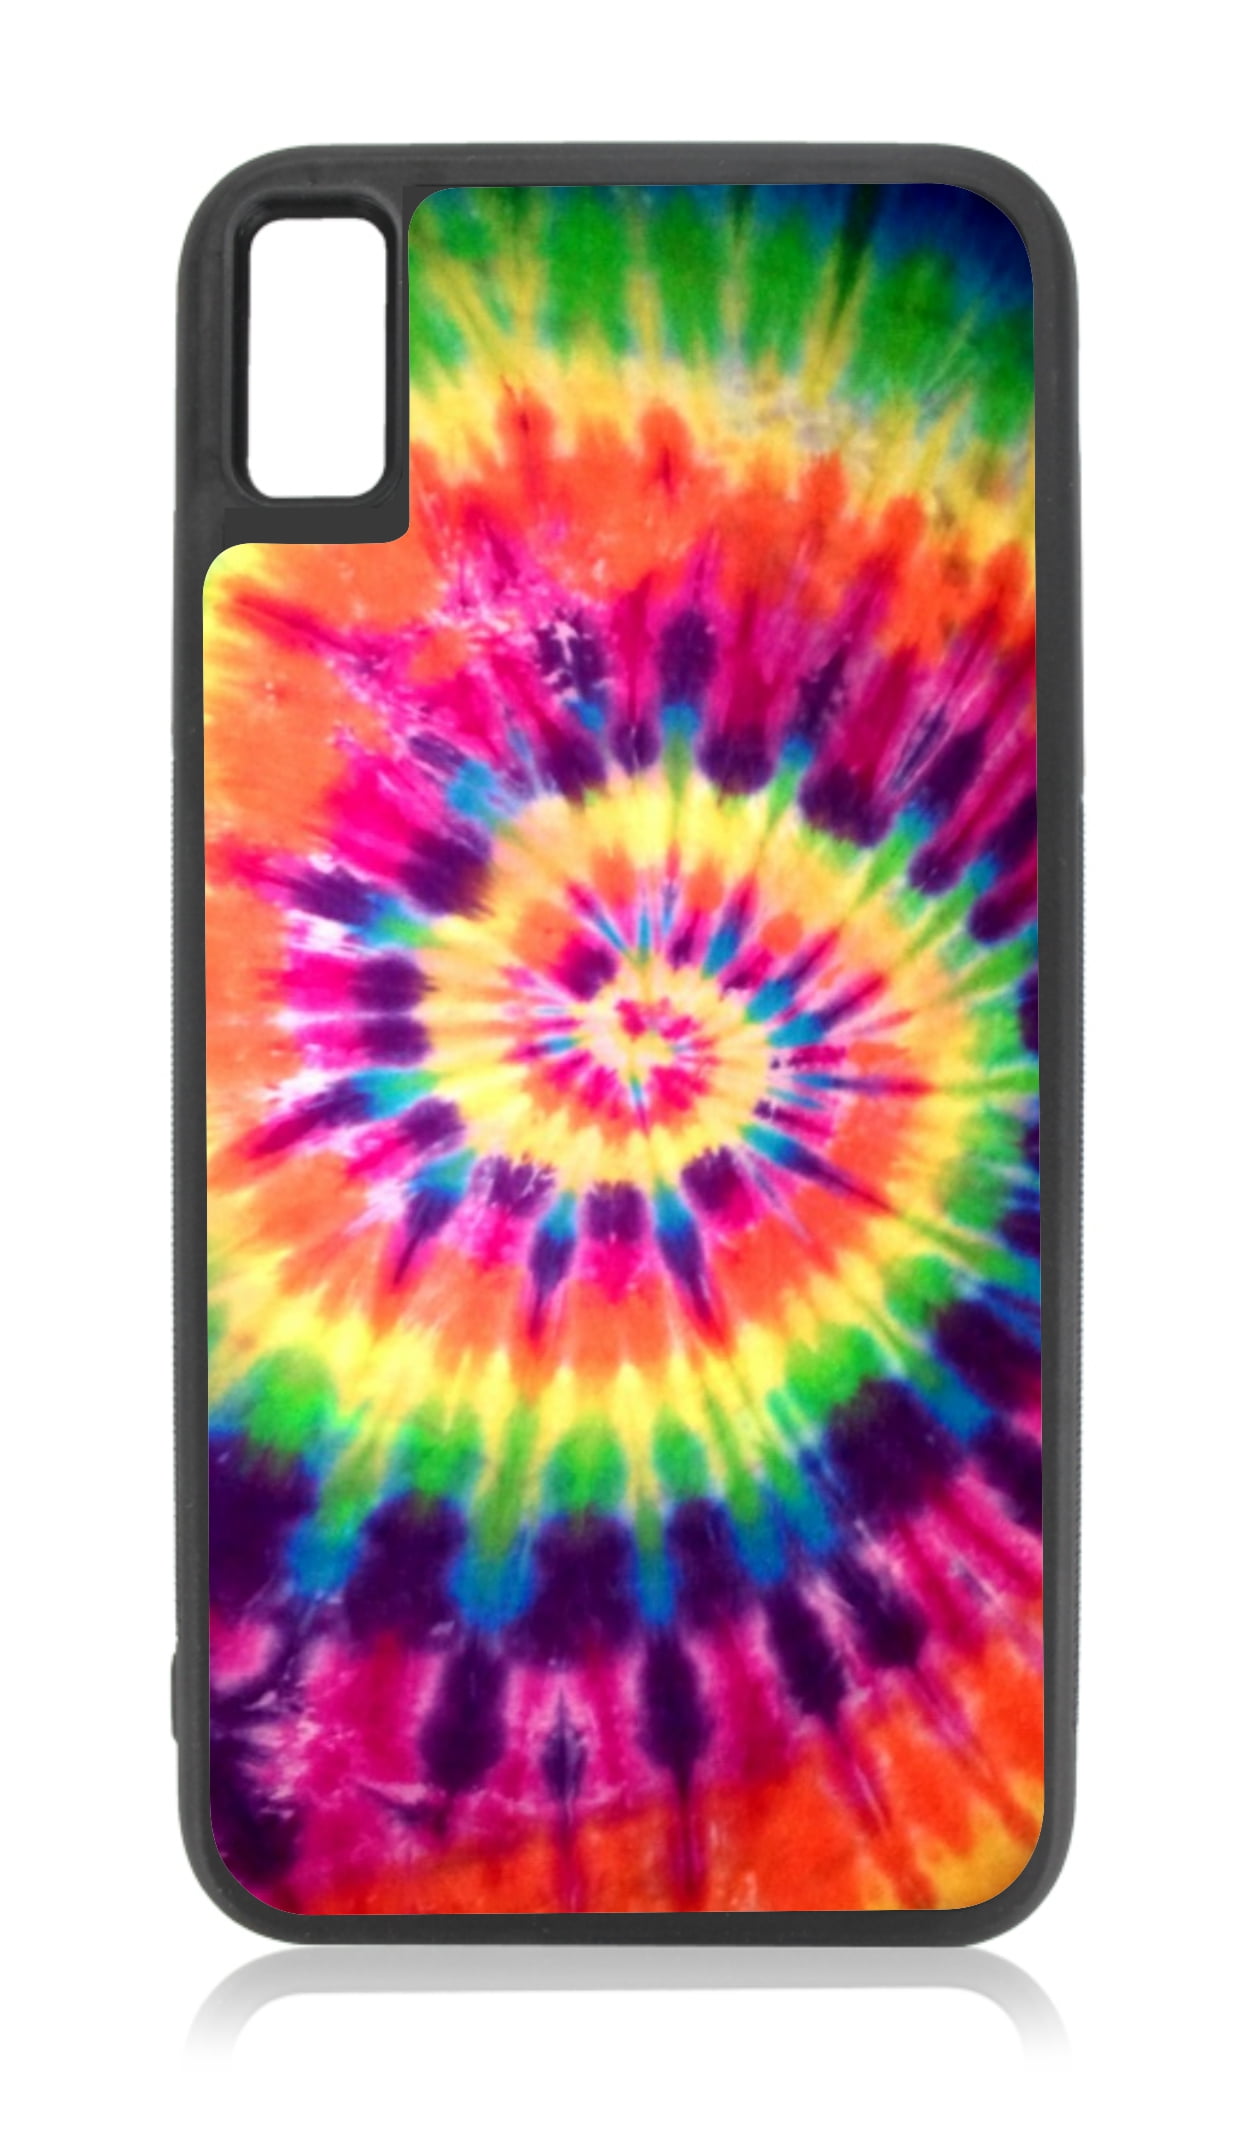 Bright Tie Dye Design Black Rubber Case for iPhone XR - iPhone XR Phone